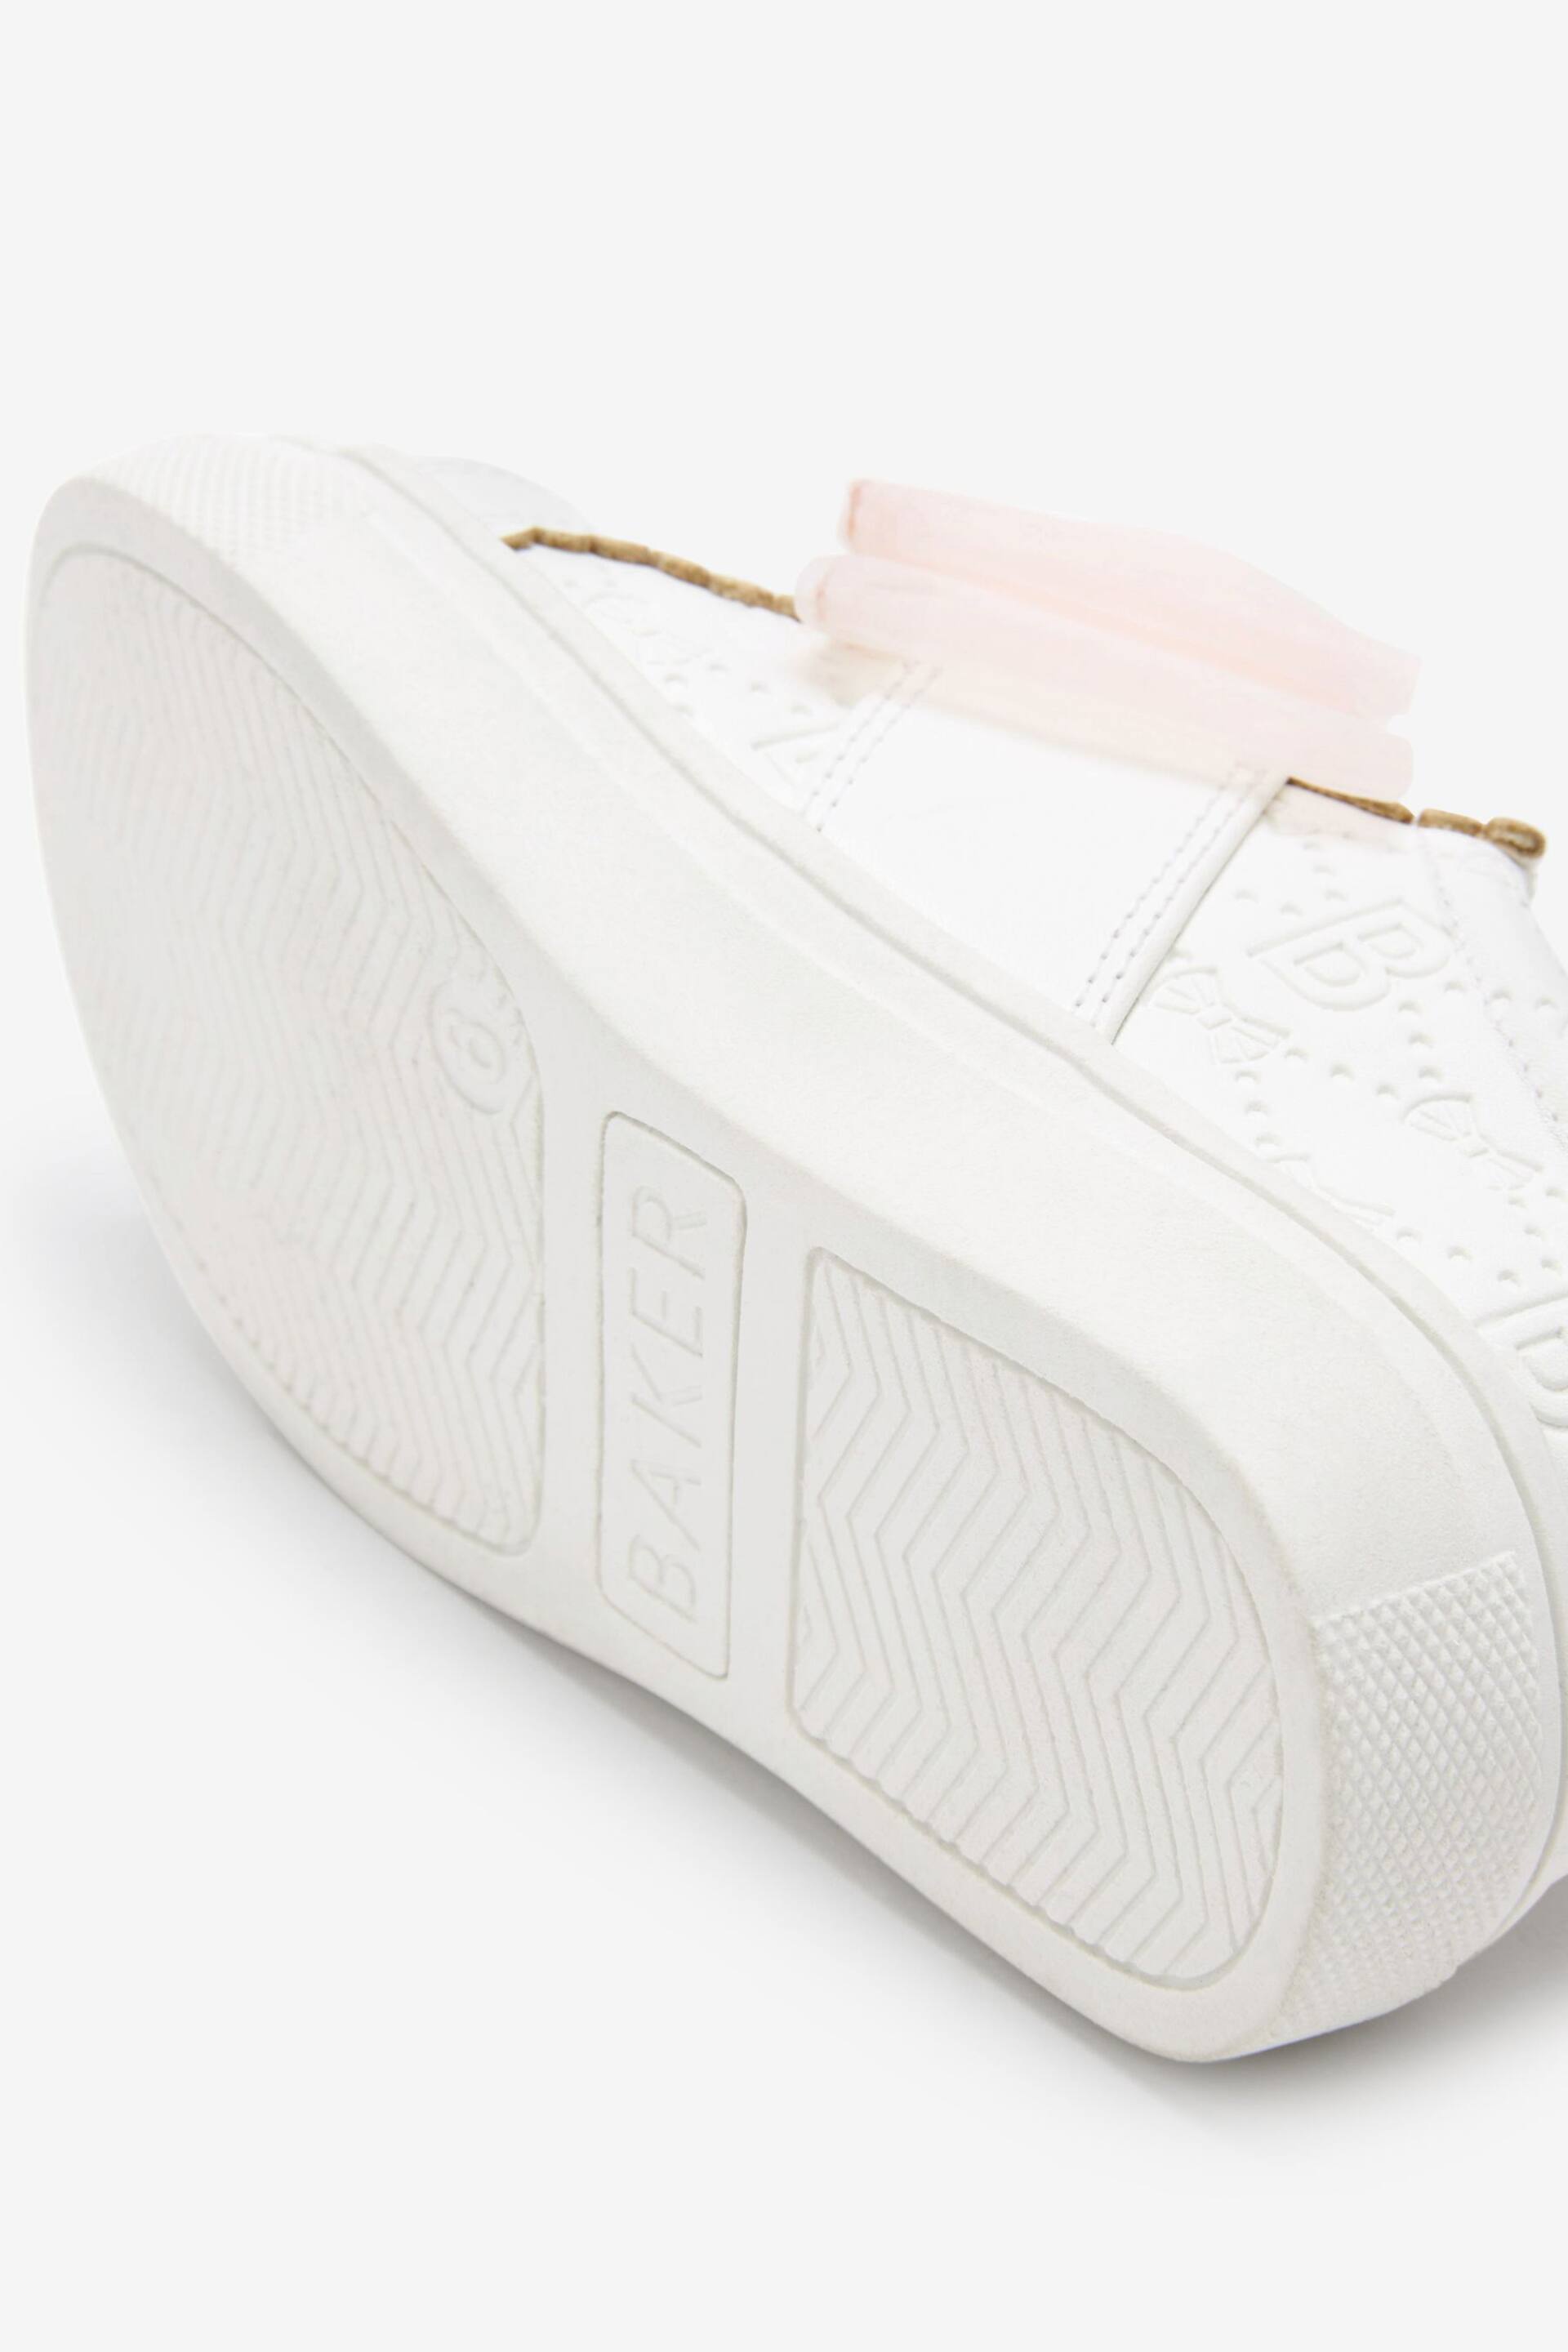 Baker by Ted Baker Organza Bow Trainers - Image 5 of 5